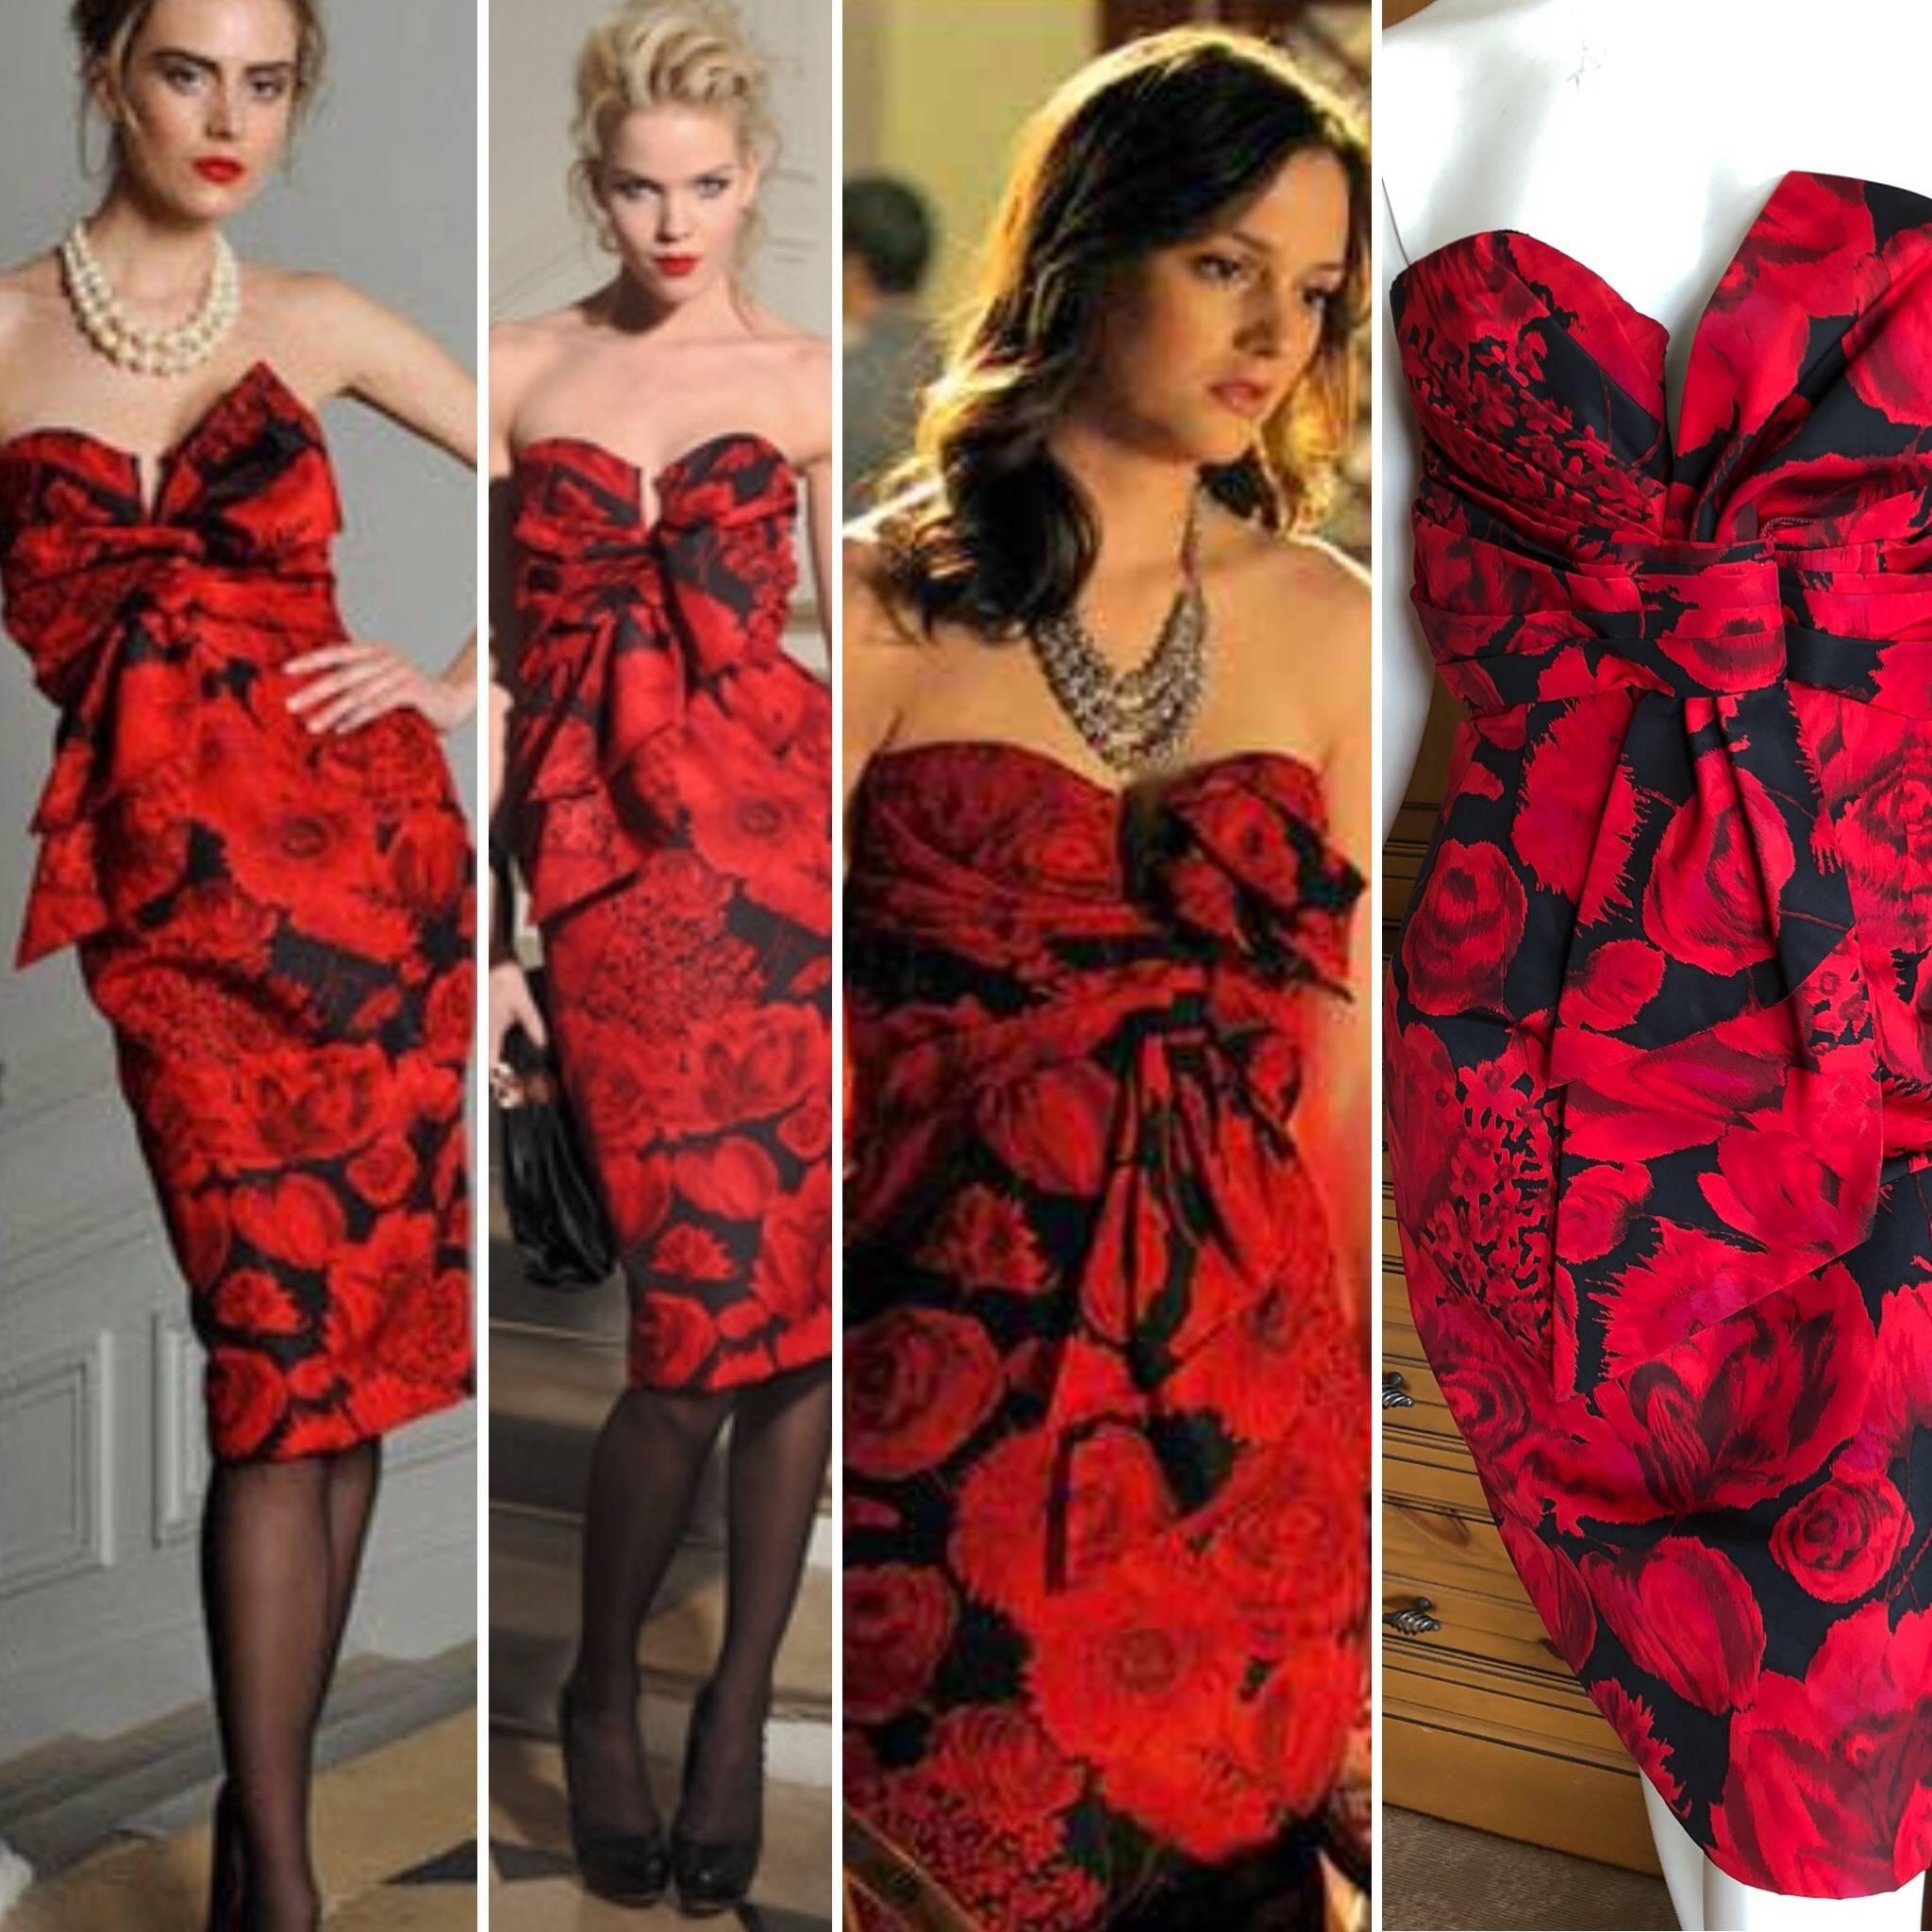 Christian Dior Pre Fall 2009 by John Galliano Red Floral Strapless Dress.
There is a full corset in the bodice, so classic Galliano/Dior.
This is so pretty and was worn in the TV series Gossip Girl by Blair Waldorf played by Leighton Meester.

Size